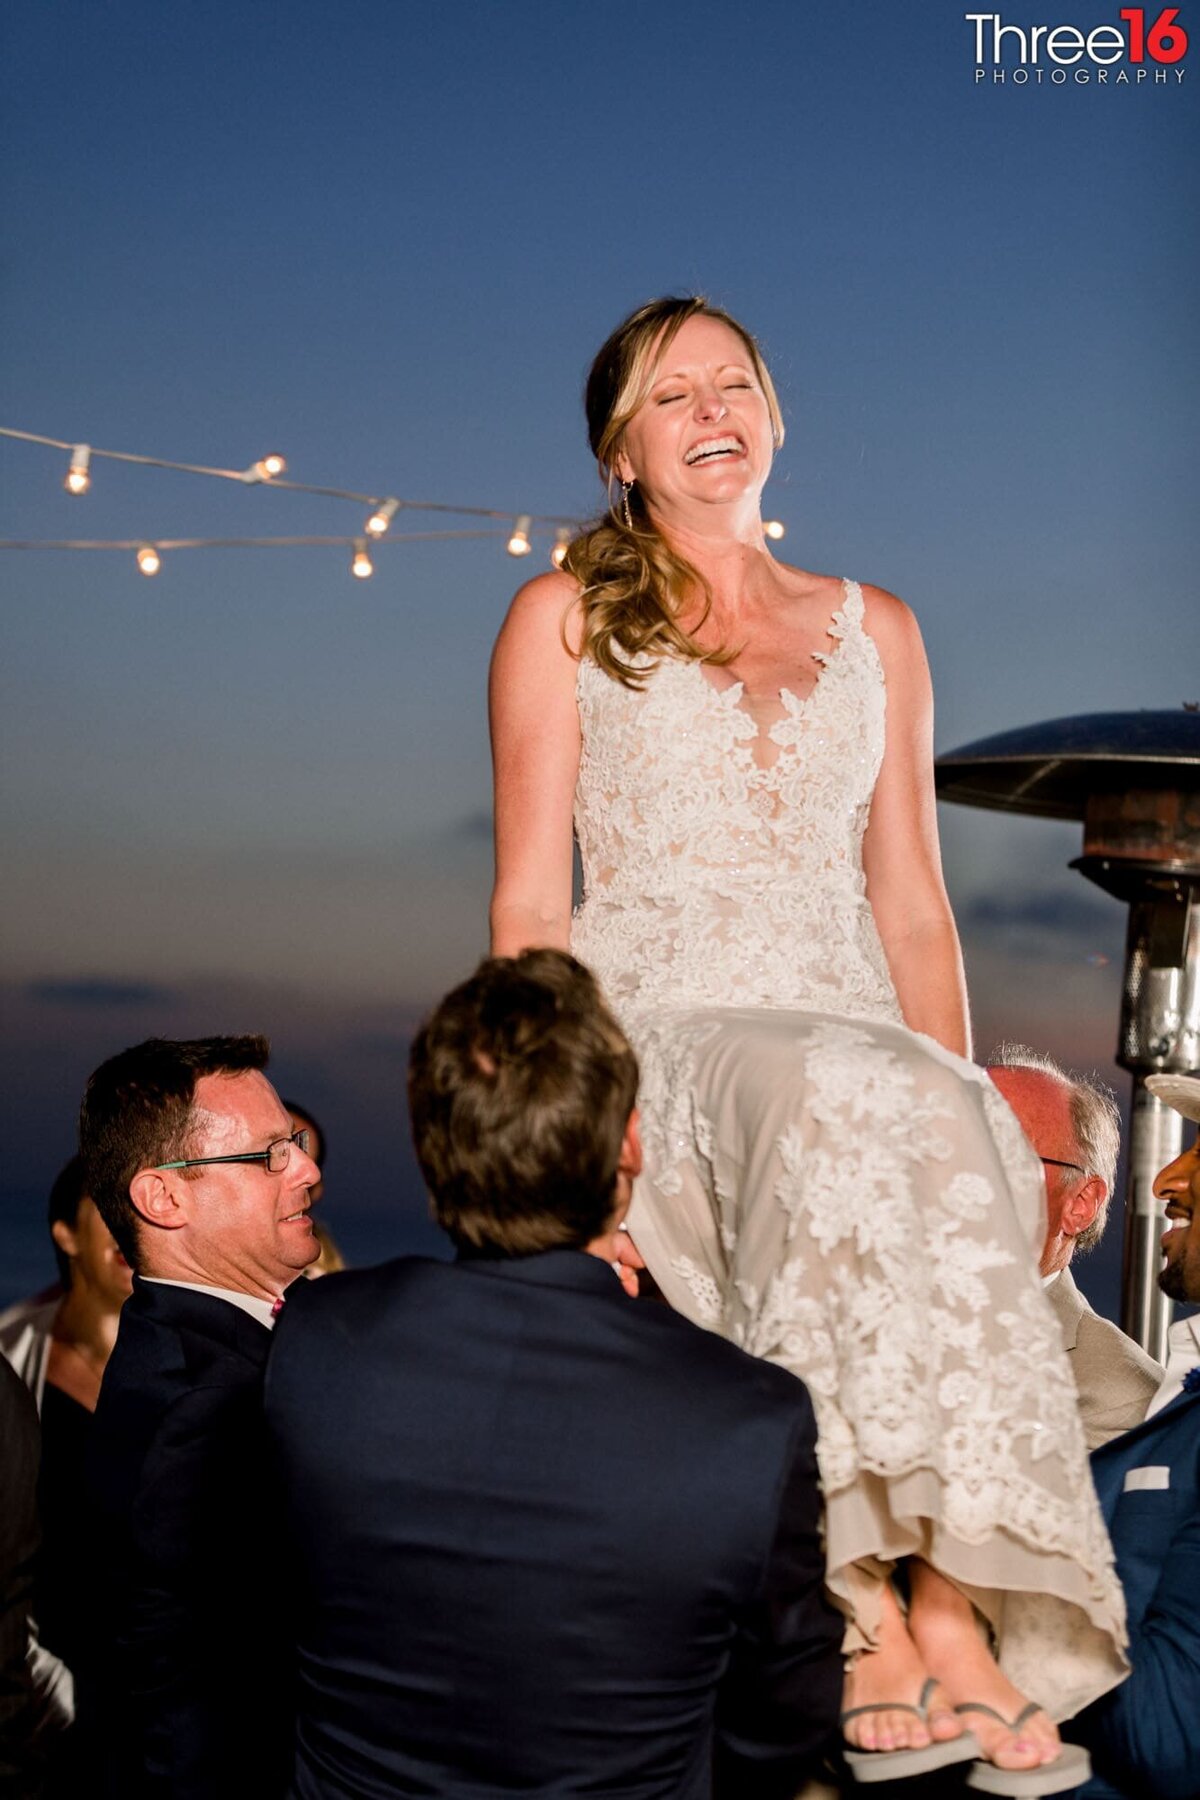 Groomsmen carry the Bride around as she sits atop a chair